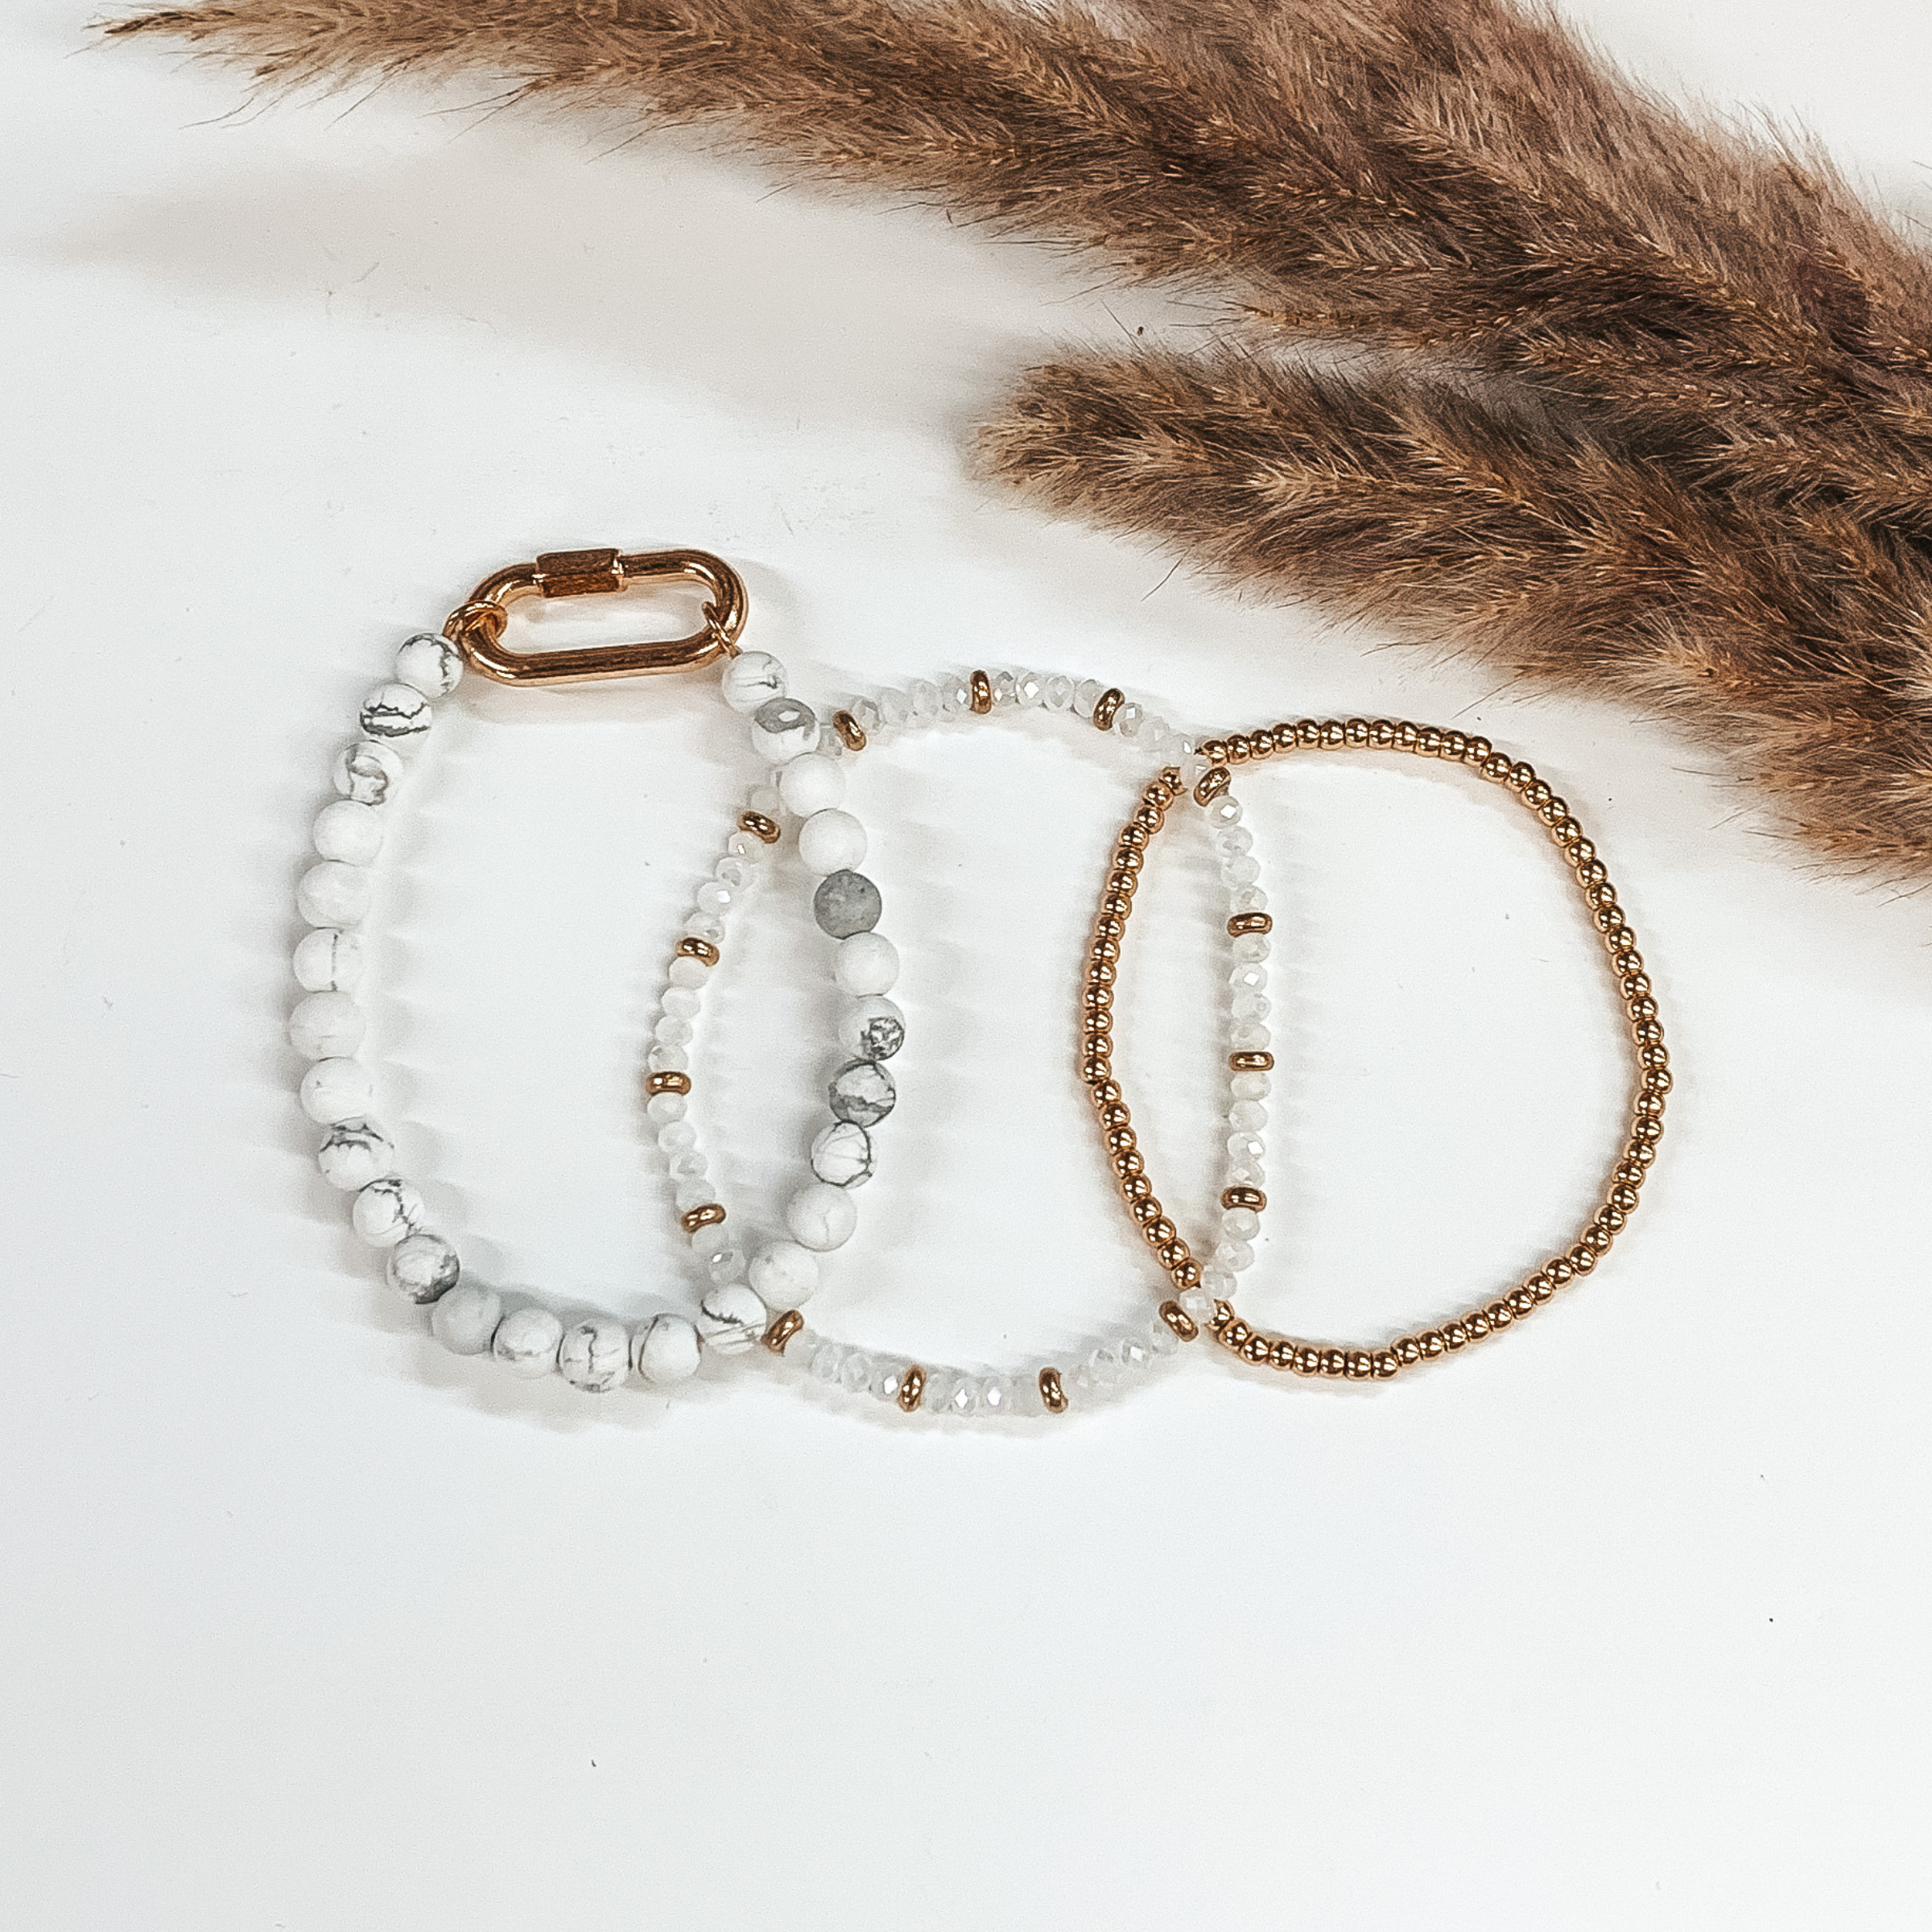 Pebble Beach Bracelets in White/Gold - Giddy Up Glamour Boutique